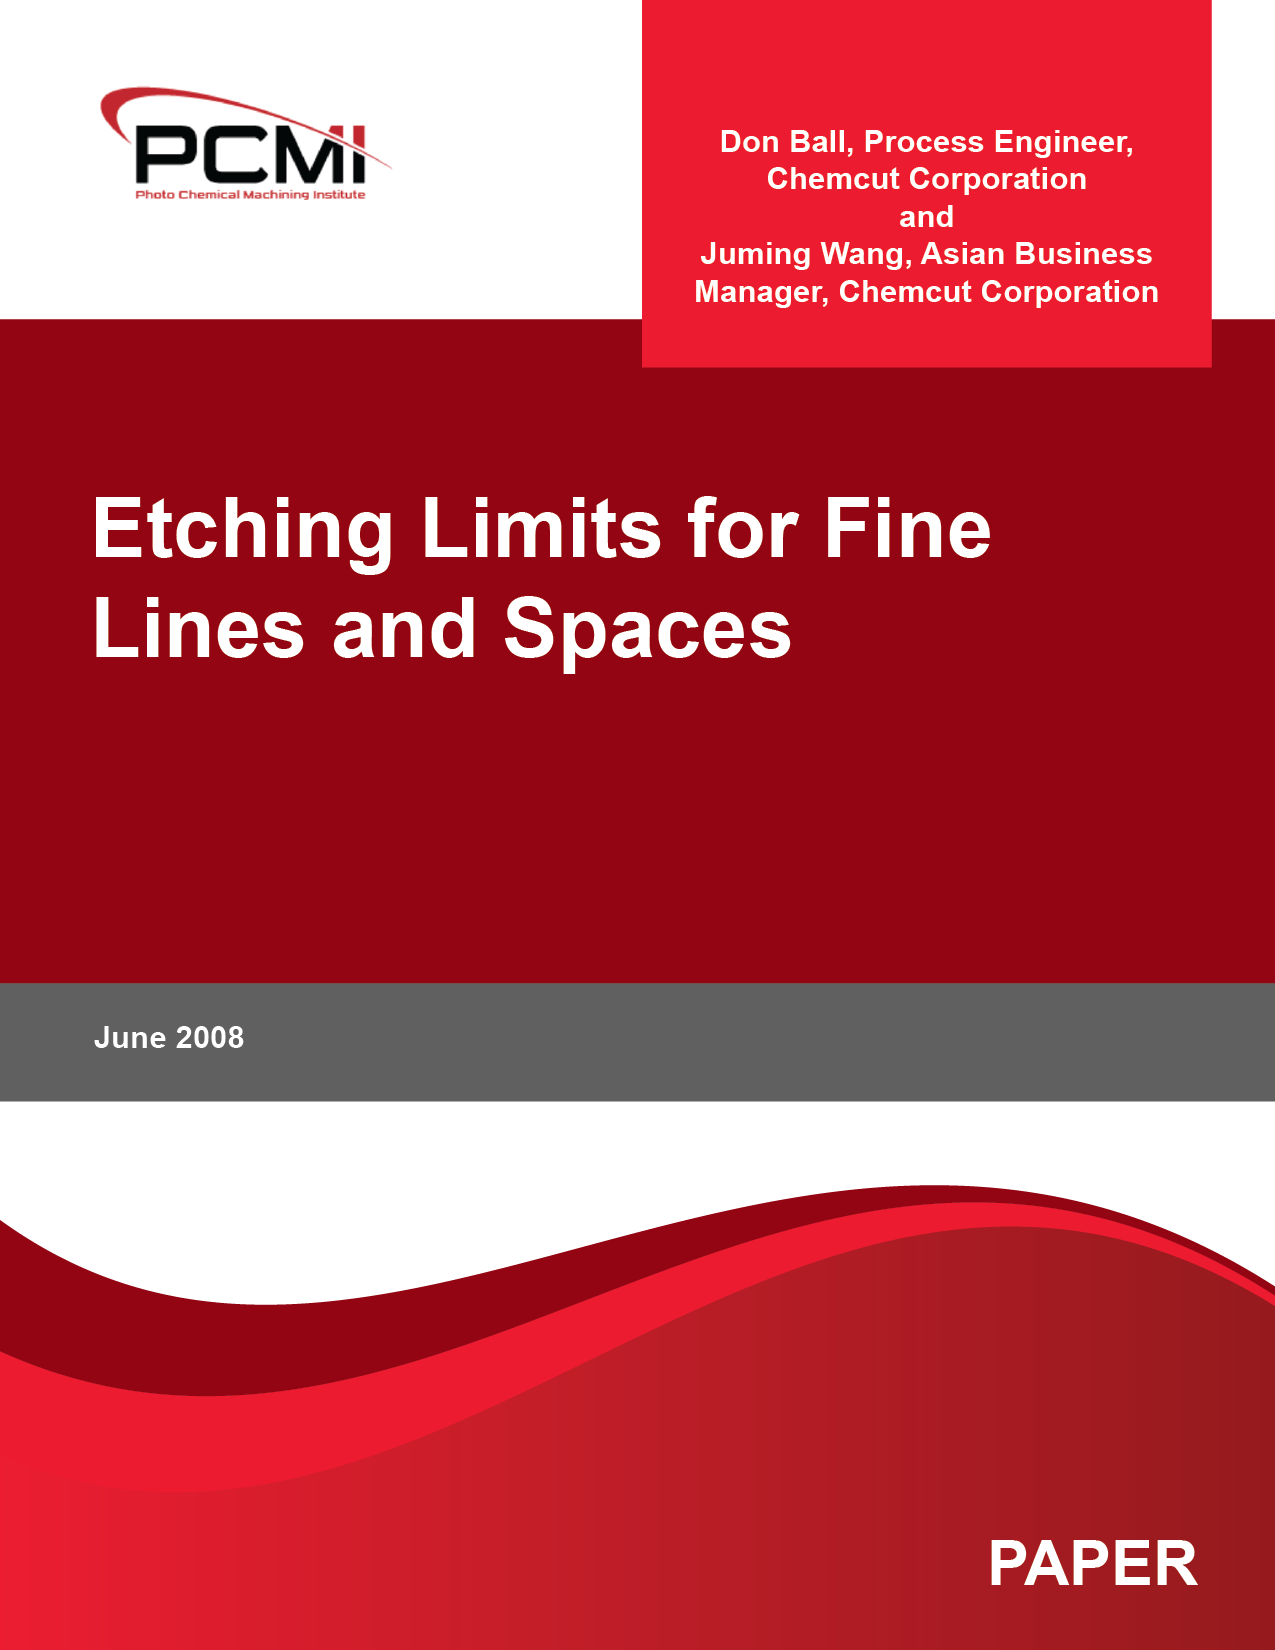 Etching Limits for Fine Lines and Spaces